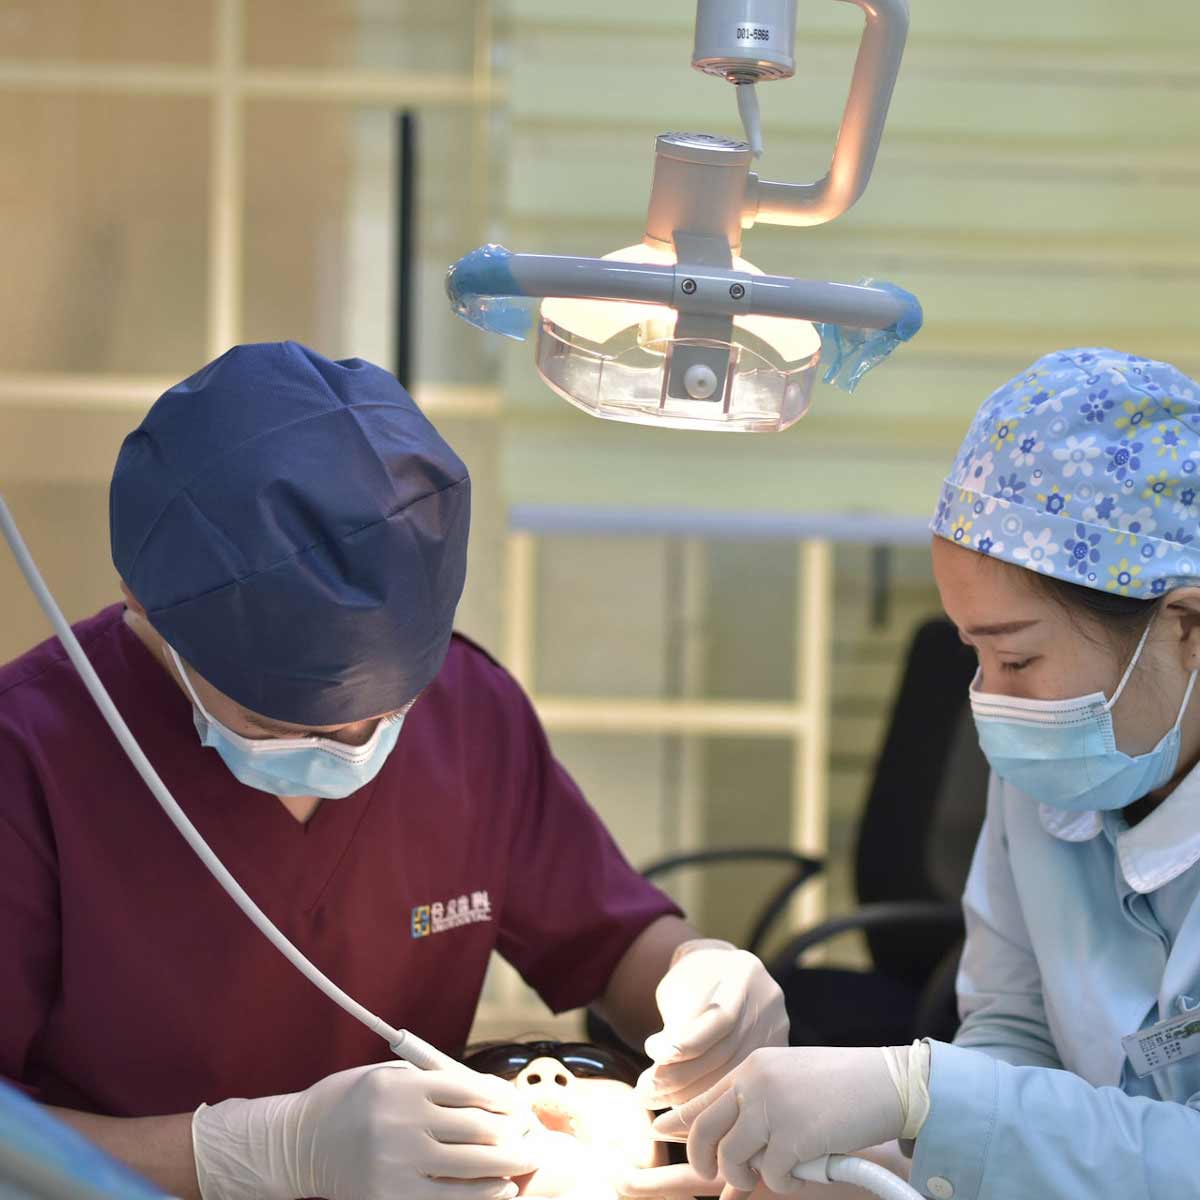 Stock image of a dentist and dental hygienist examining a patient’s mouth. 